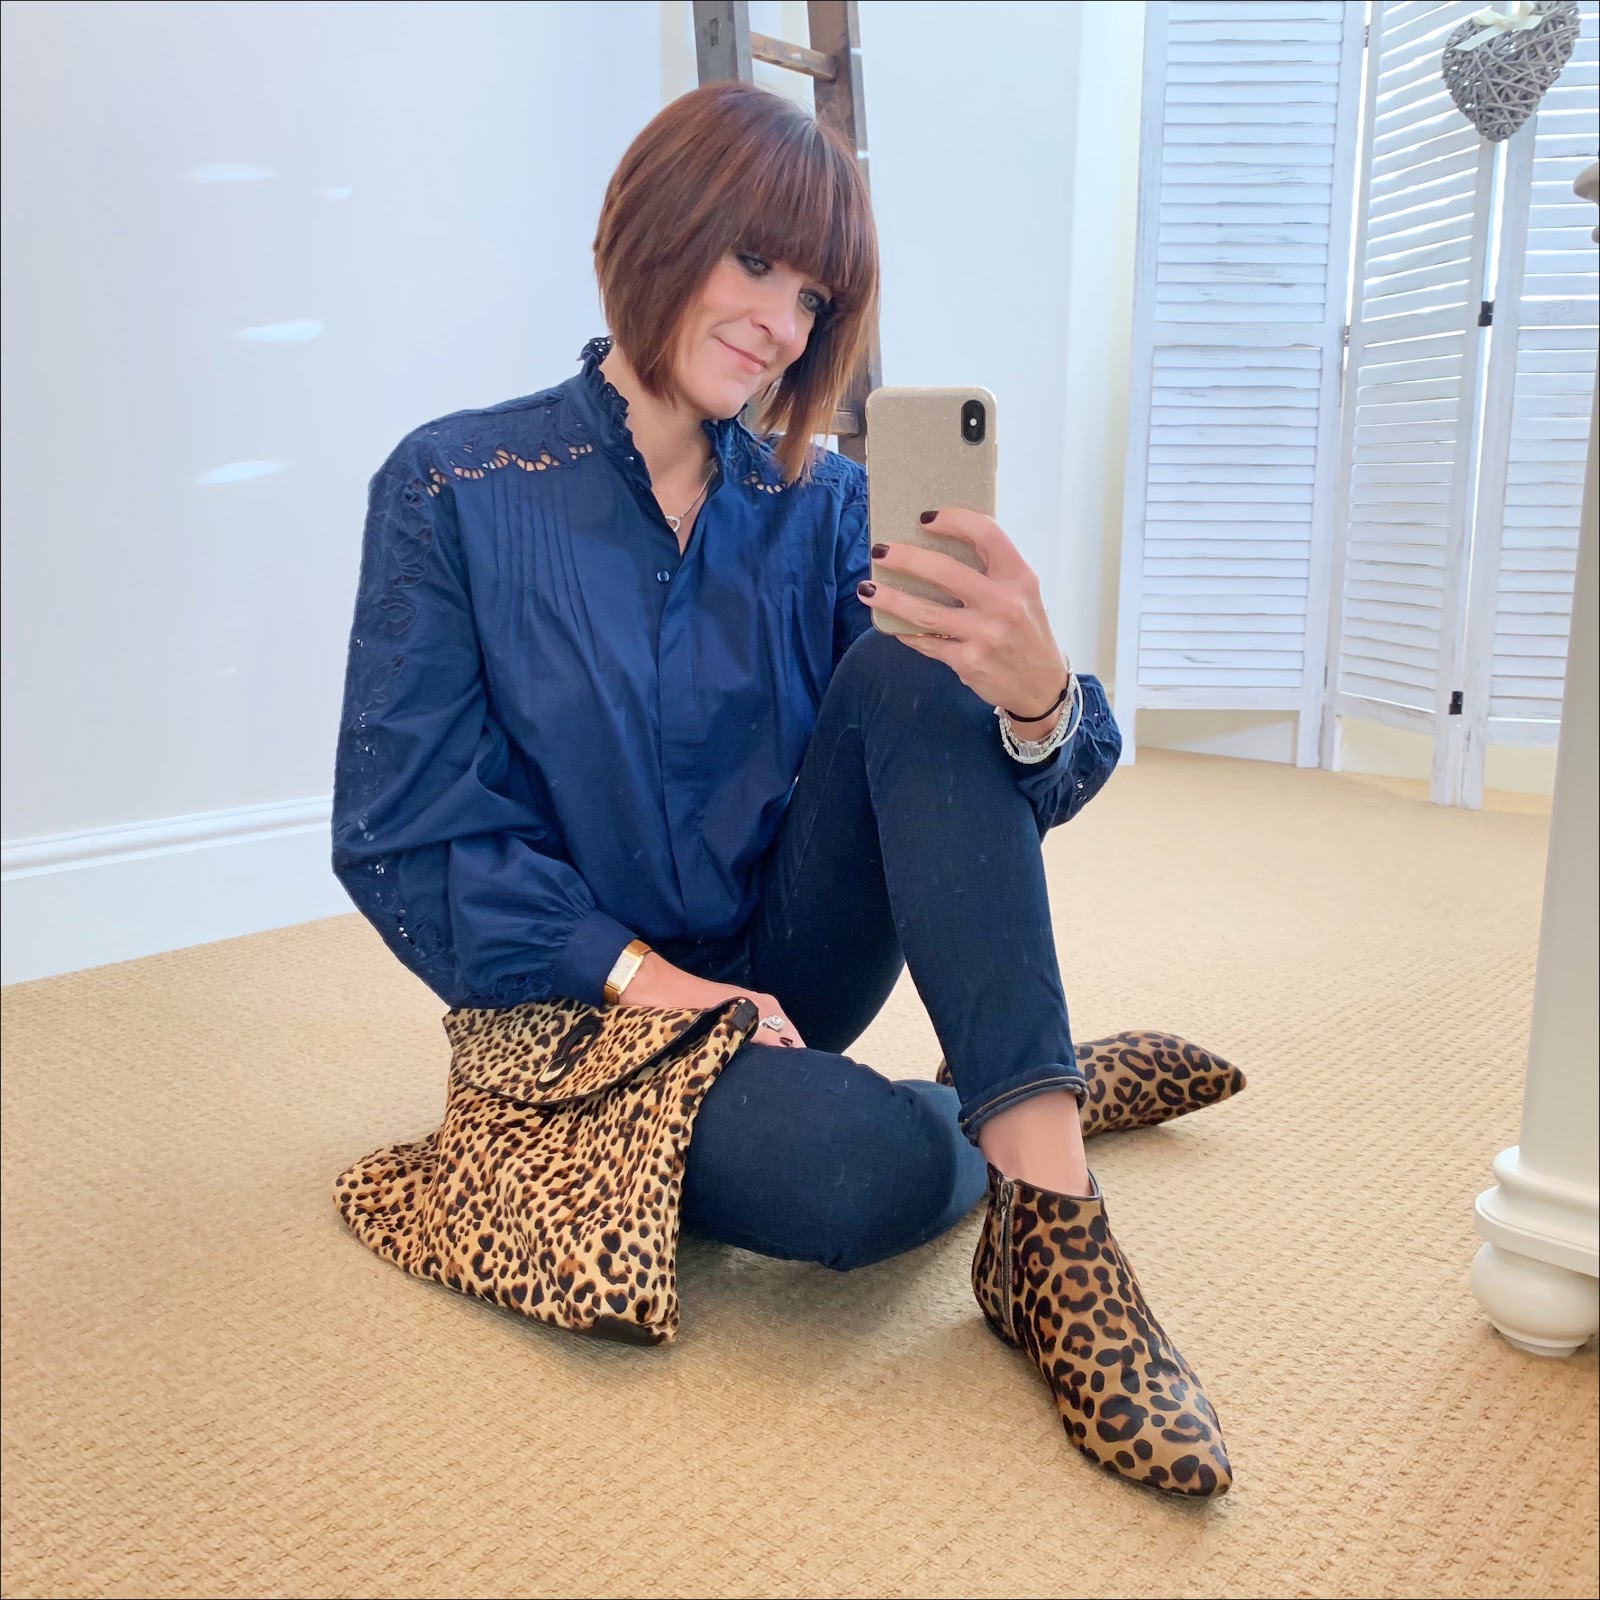 my midlife fashion, h and m embroidered blouse, j crew 8 inch toothpick jeans, boden leopard print ankle boots, zara leopard print bag